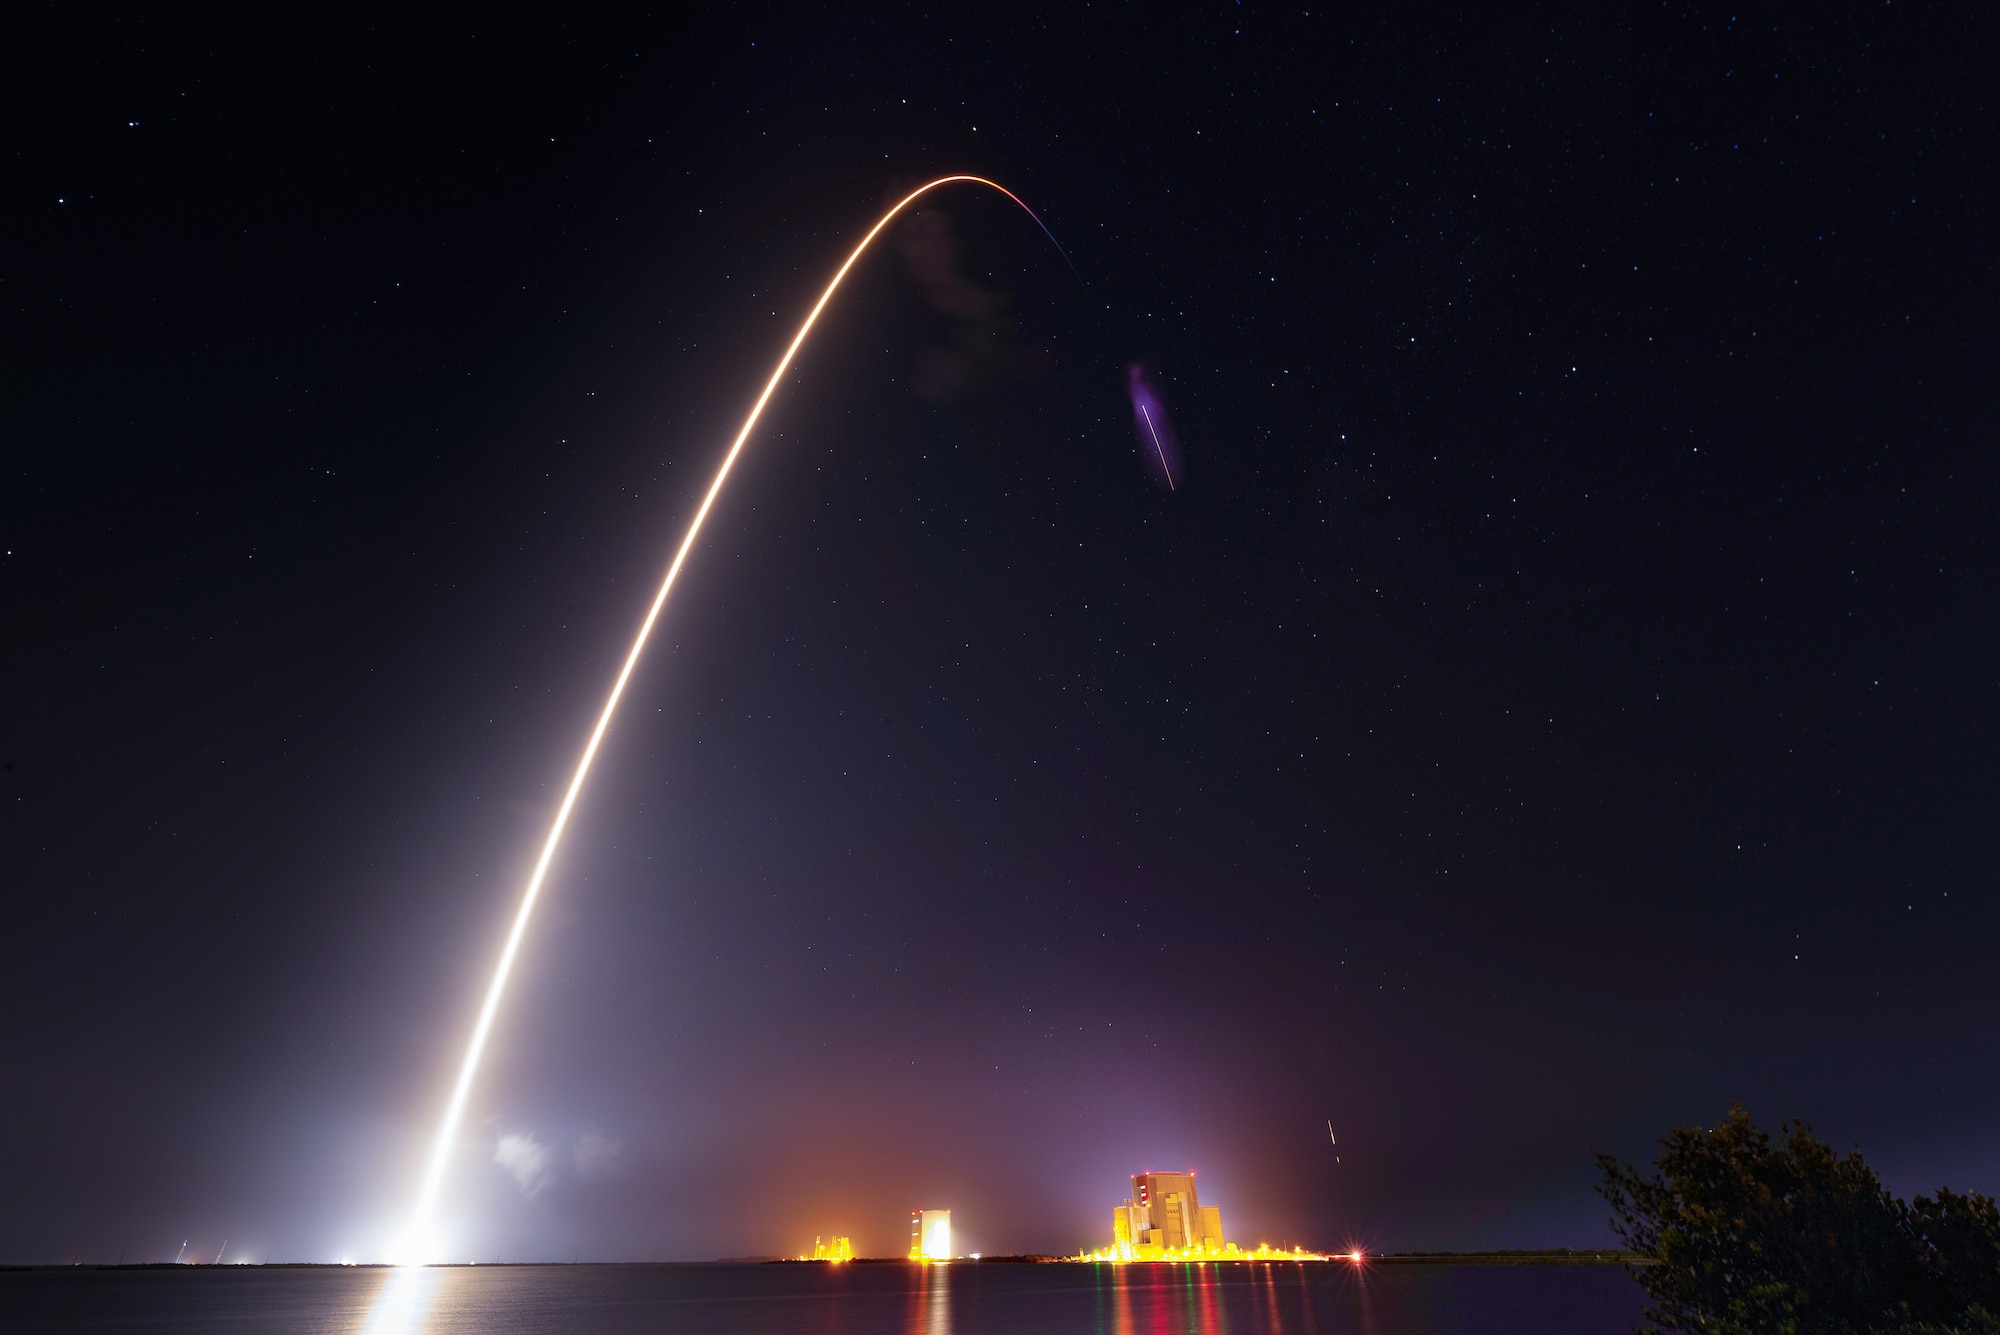 A Falcon 9 rocket launches from SLC-39A at Kennedy Space Center, Fla., April 27, 2022. The Crew-4 mission carried four astronauts to the International Space Station. (U.S. Space Force photo by Joshua Conti)